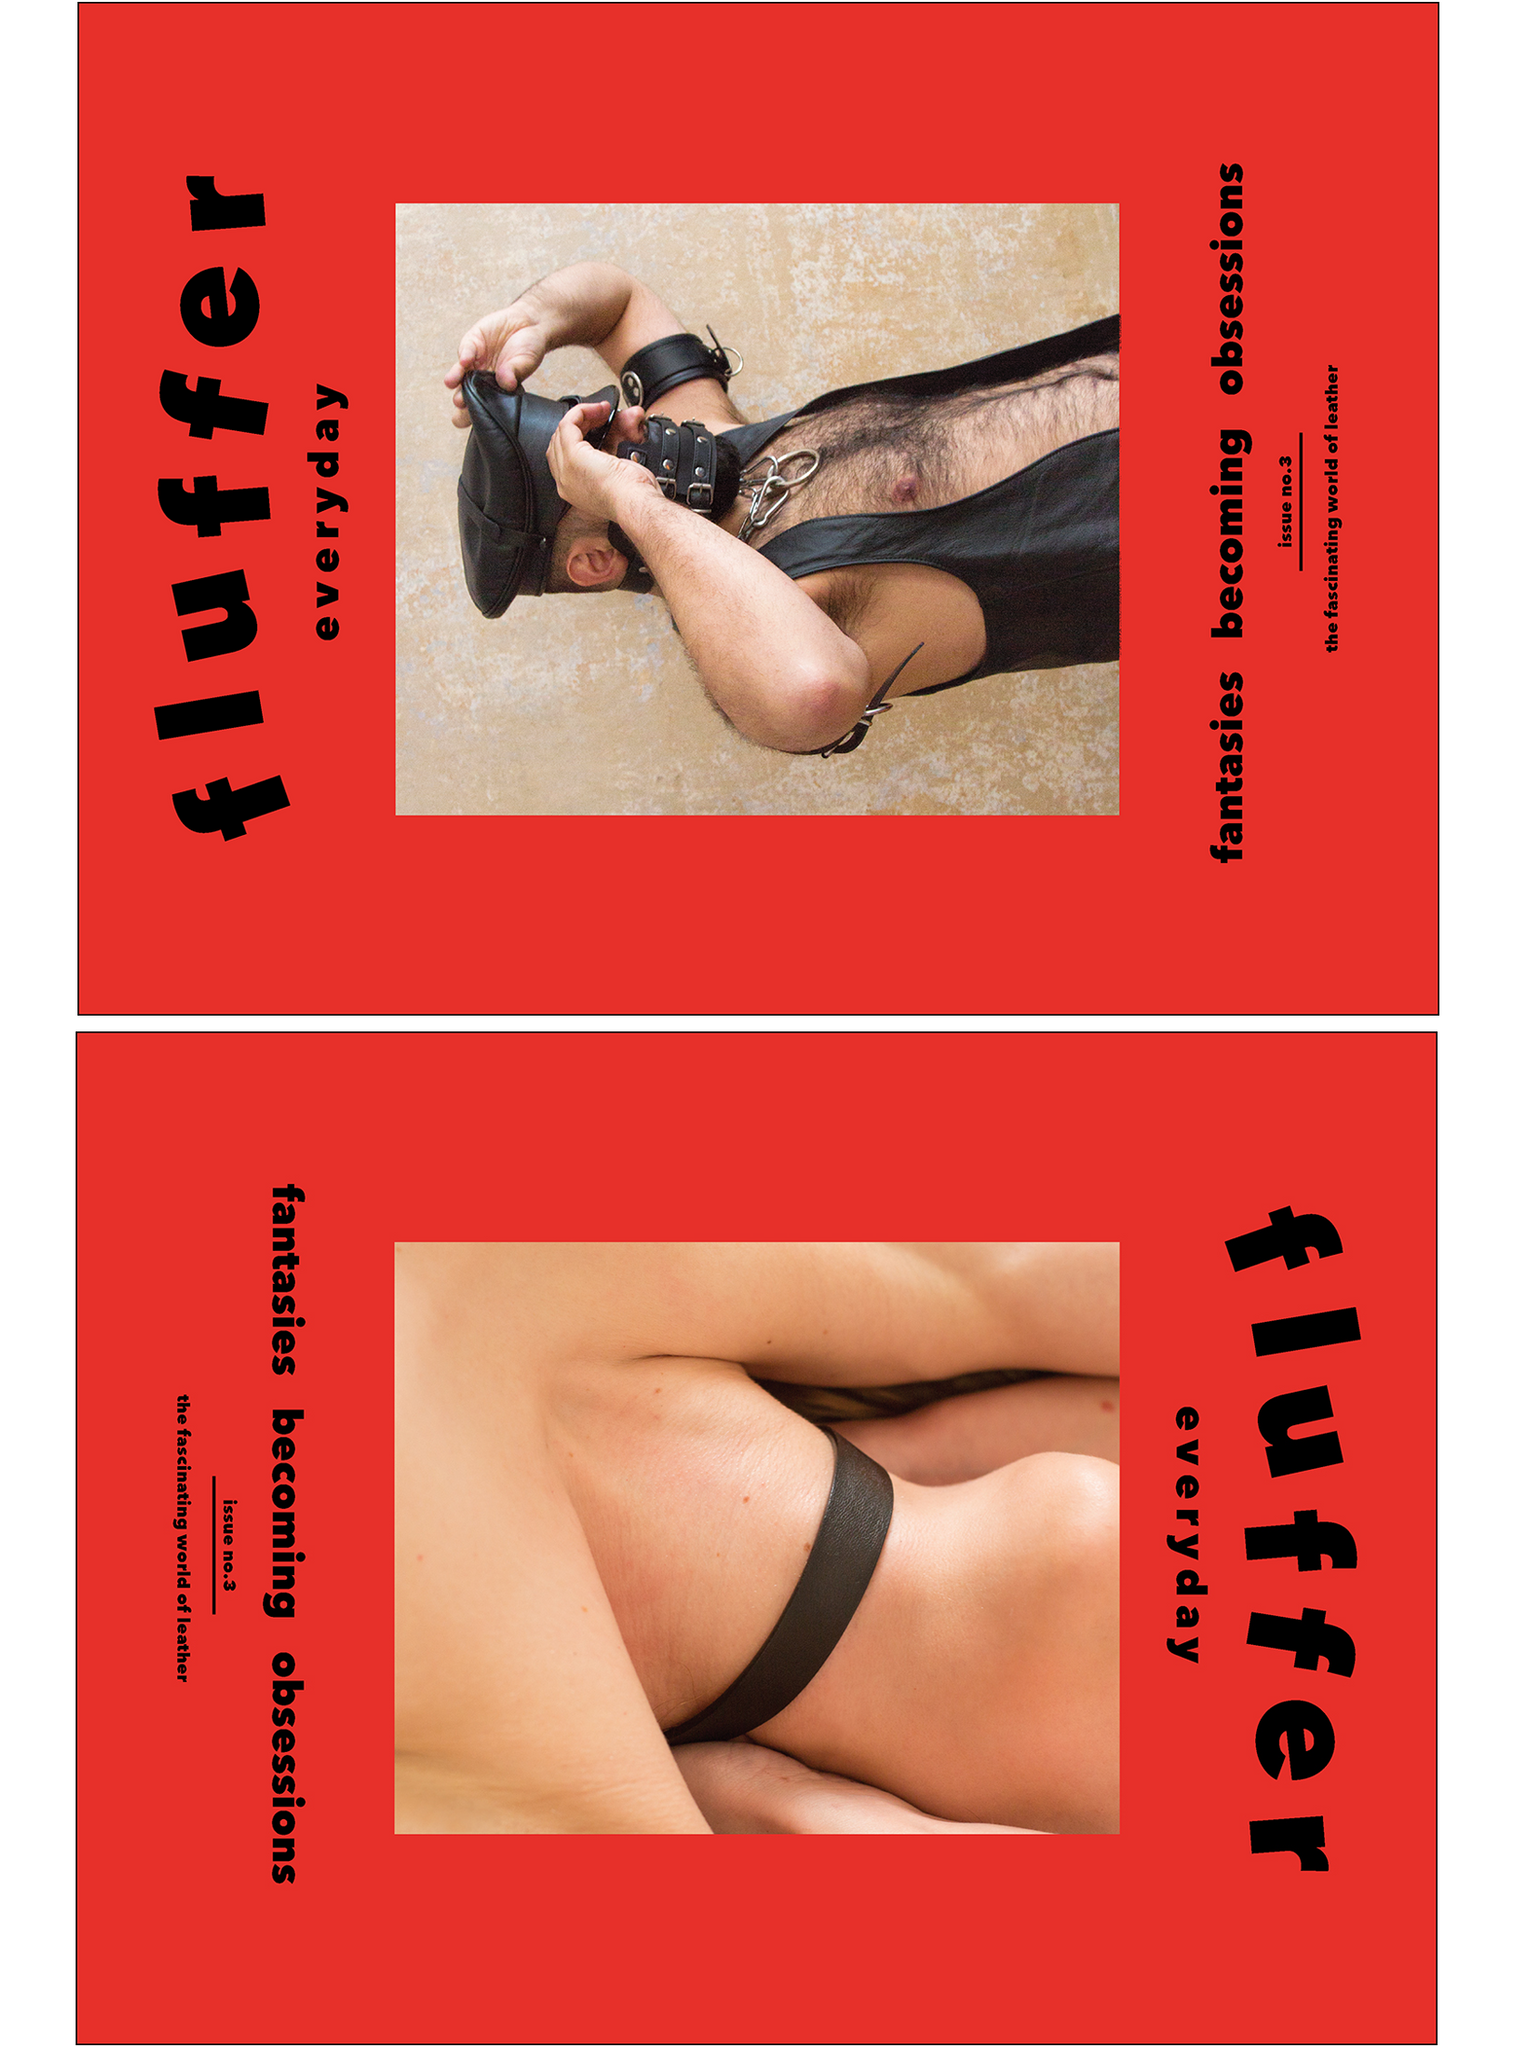 issue no.3 - both covers